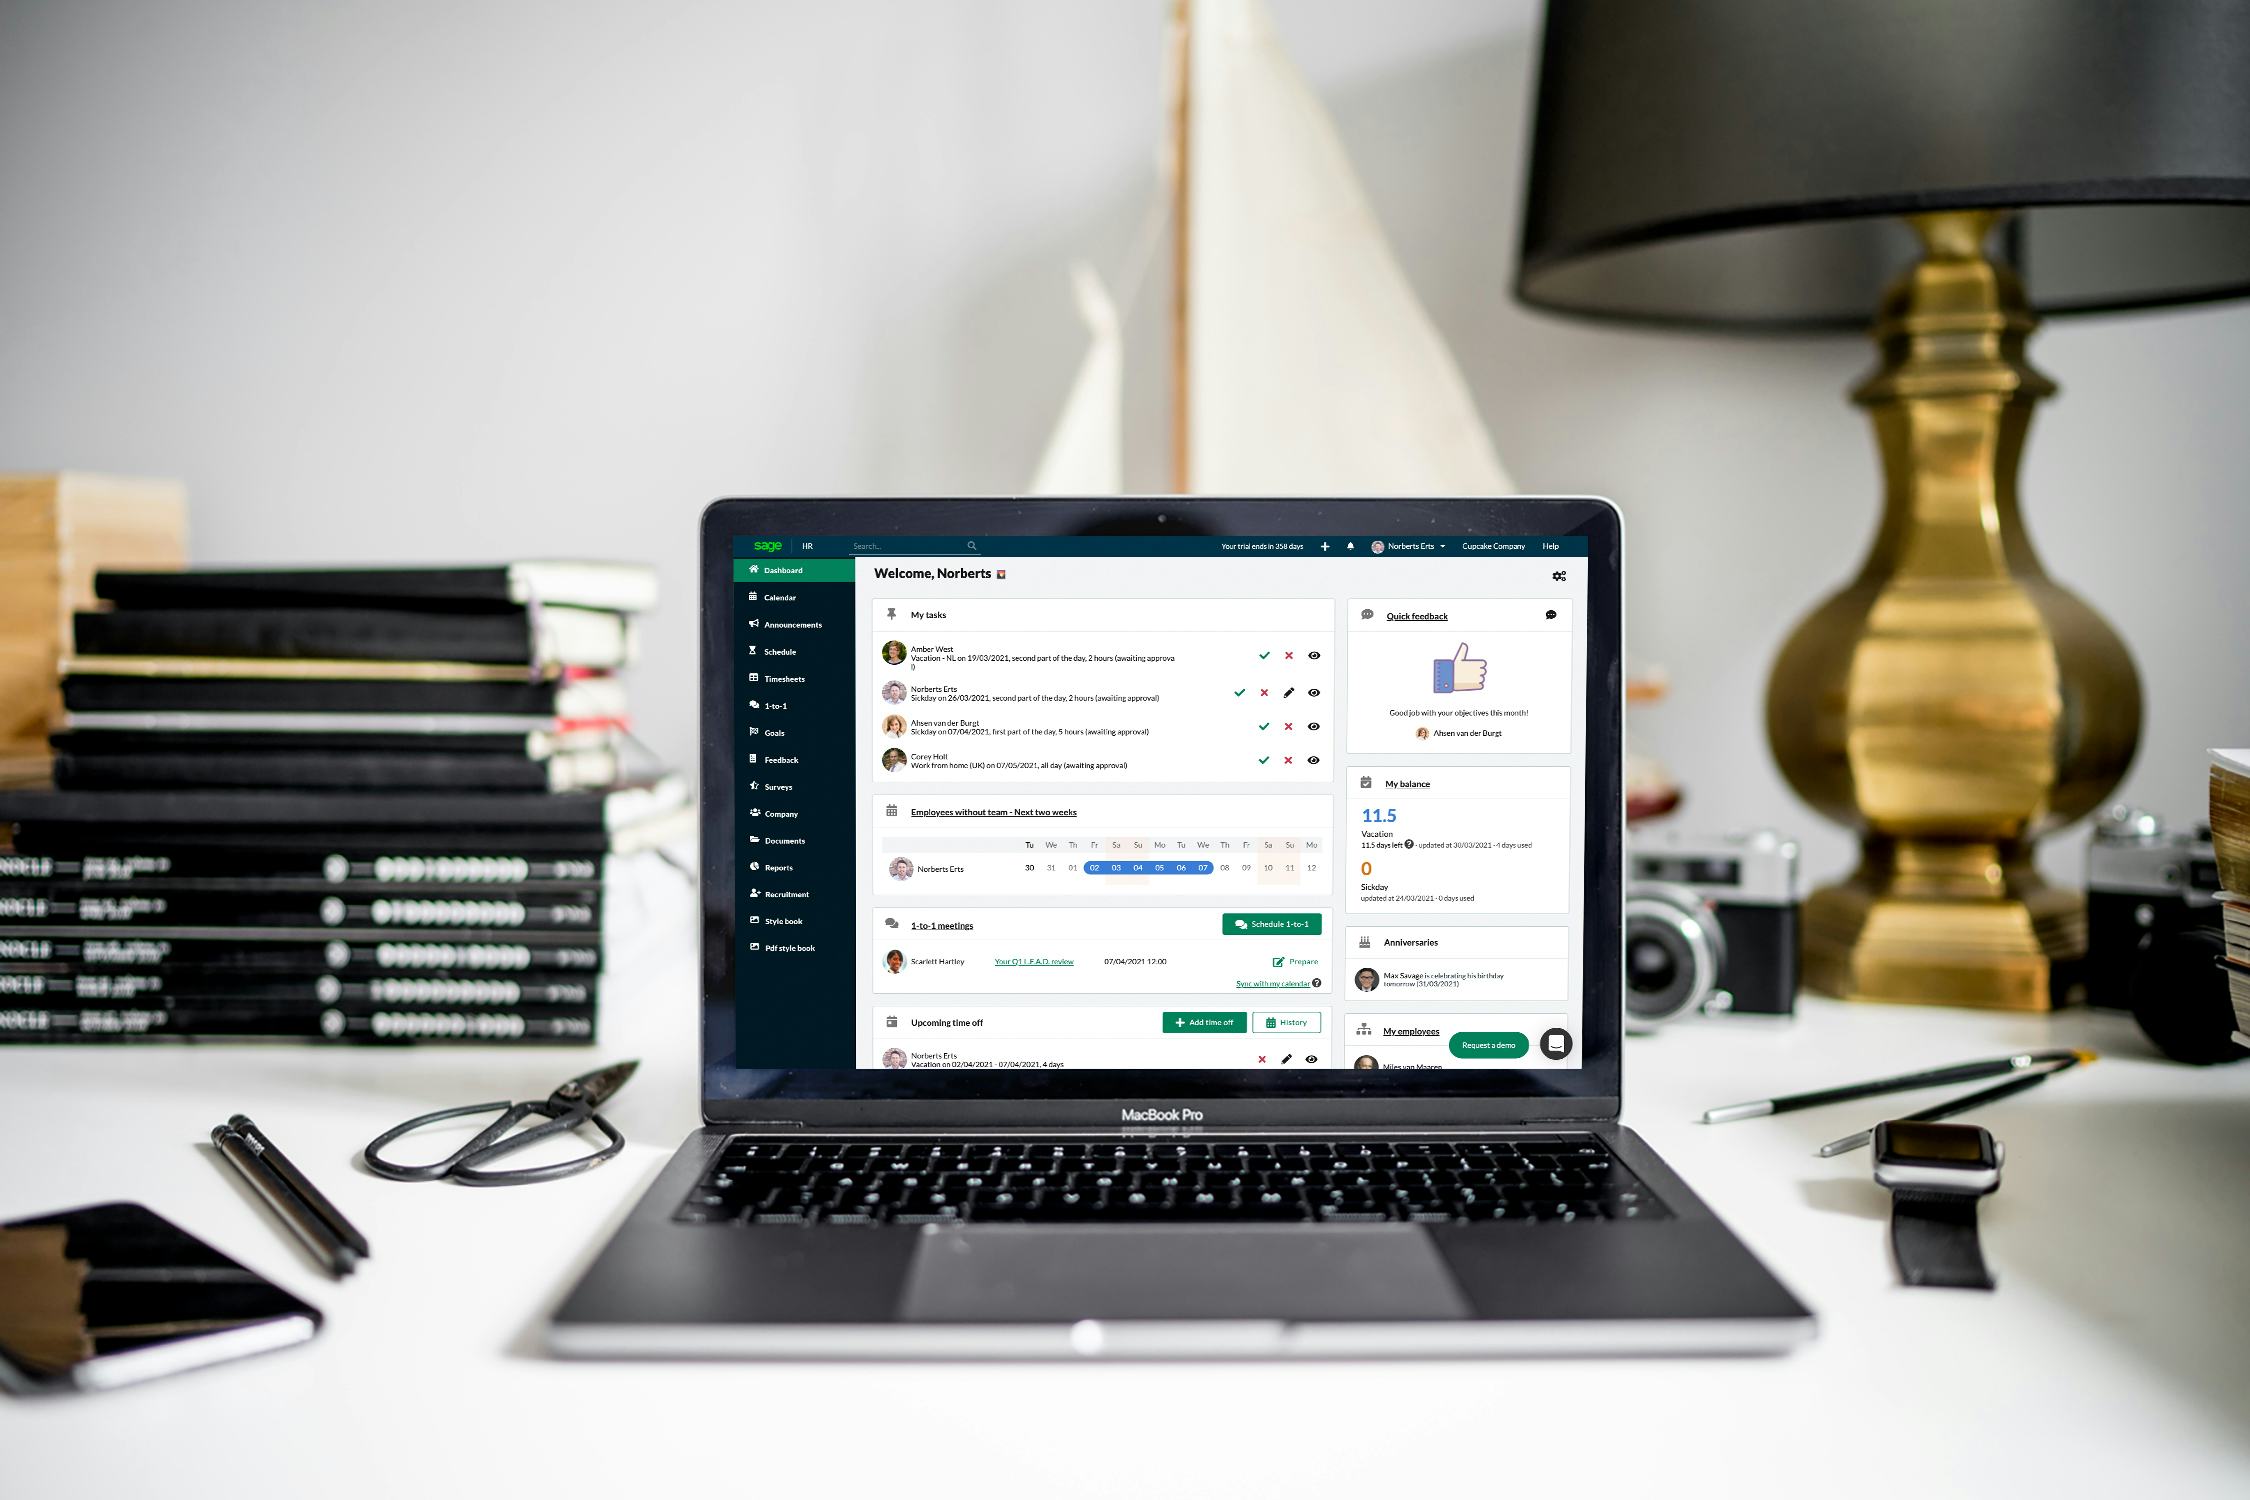 Sage HR Software - Sage HR is a fantastic cloud based human resources management solution that helps you remotely track, manage and engage your employees as easily as you do in the office.